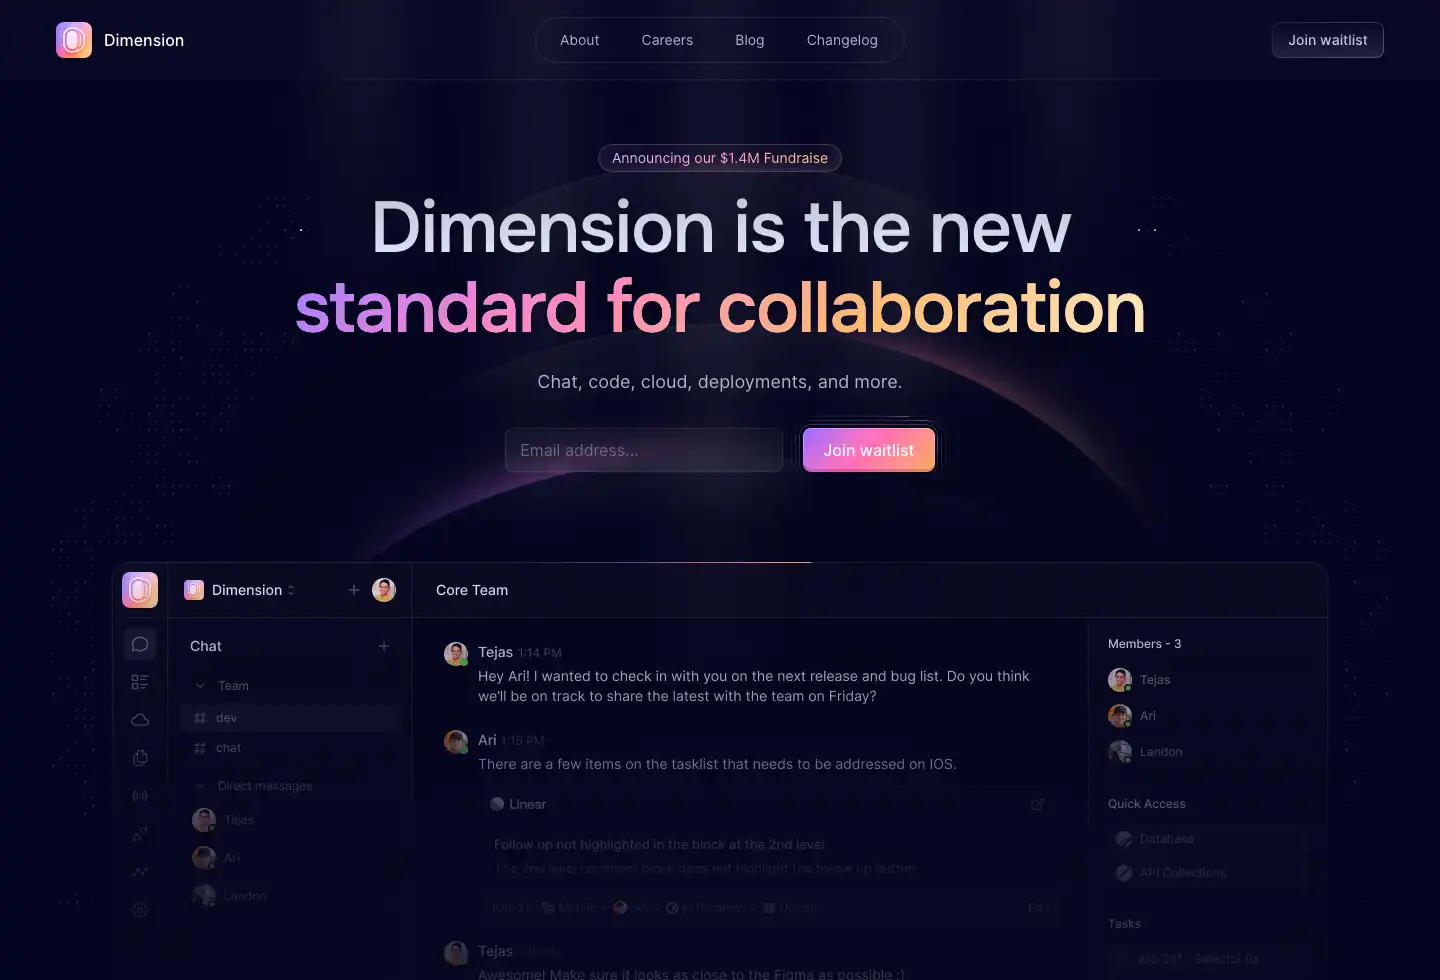 Dimension — The new standard for collaboration.